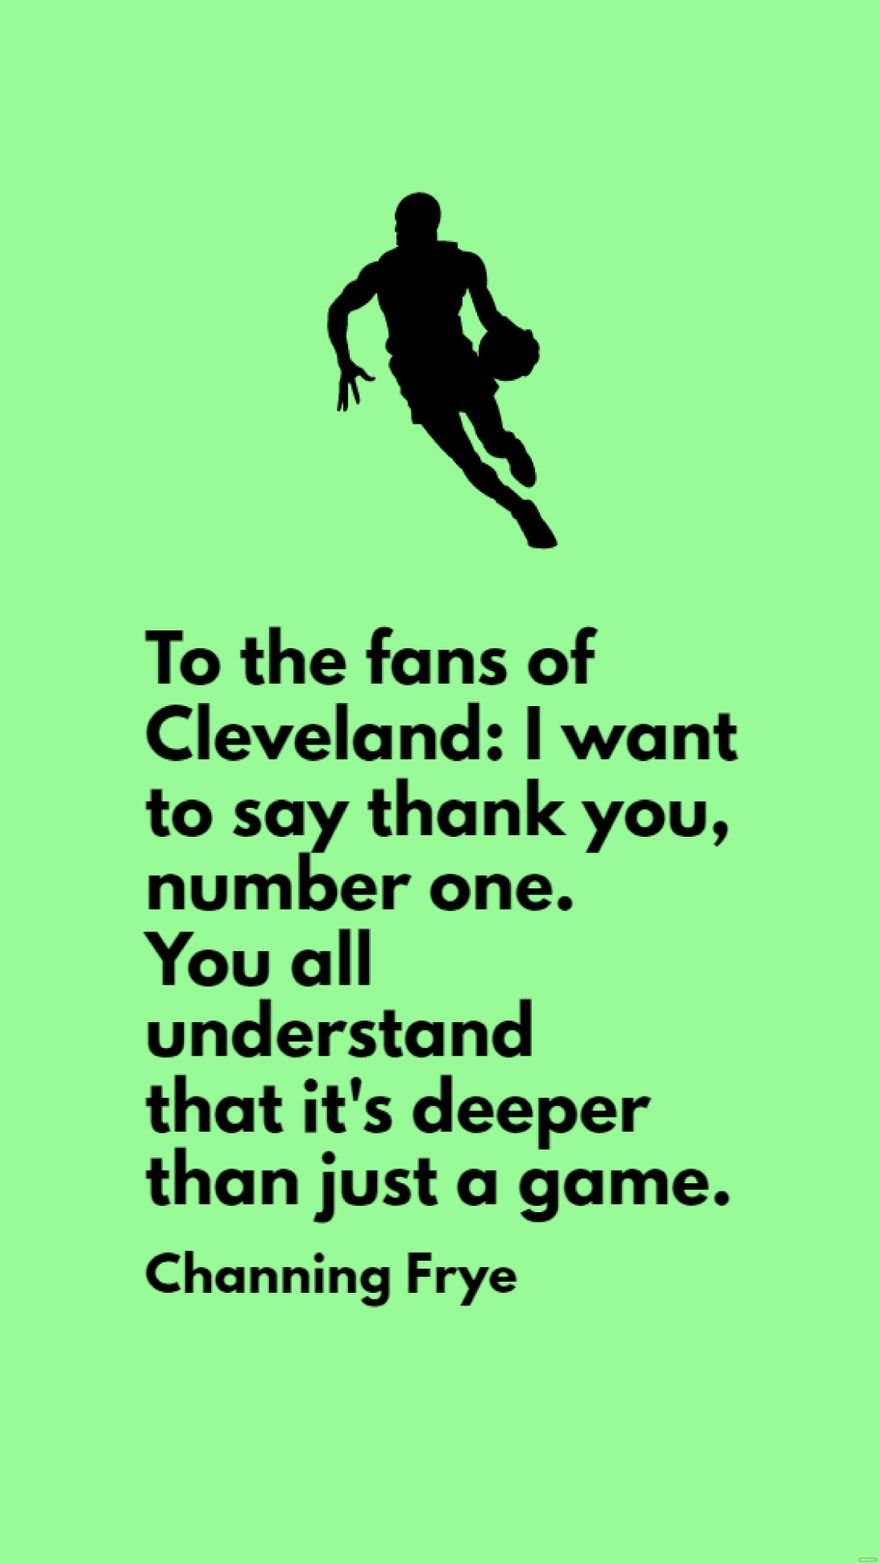 Free Channing Frye - To the fans of Cleveland: I want to say thank you, number one. You all understand that it's deeper than just a game. in JPG